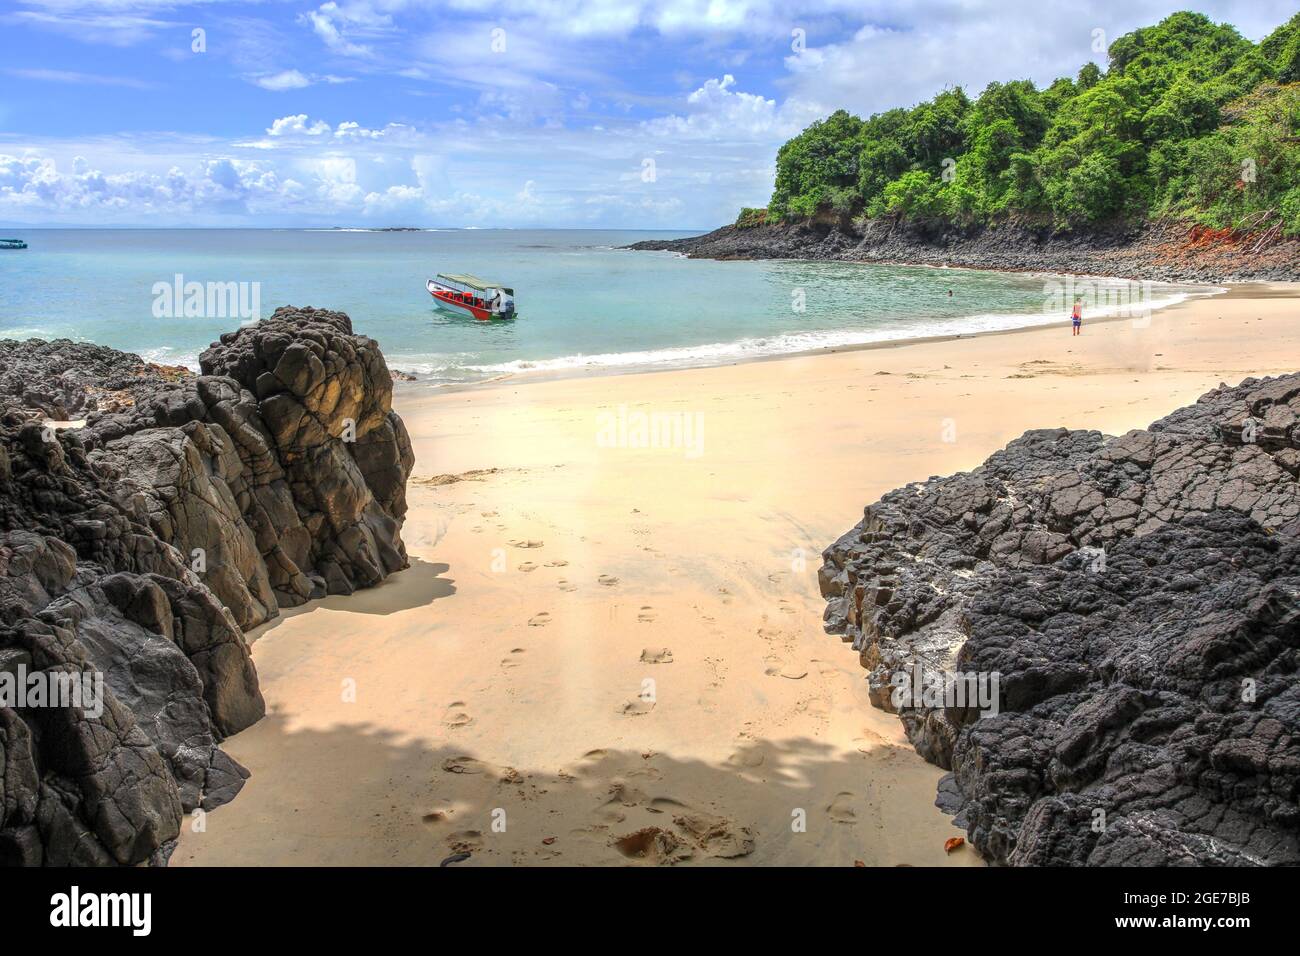 A secluded tropical beach on the small Isla Bolanos in Chiriqui province, Panama. The island can be reach only by boat ride from Boca Chica. Stock Photo